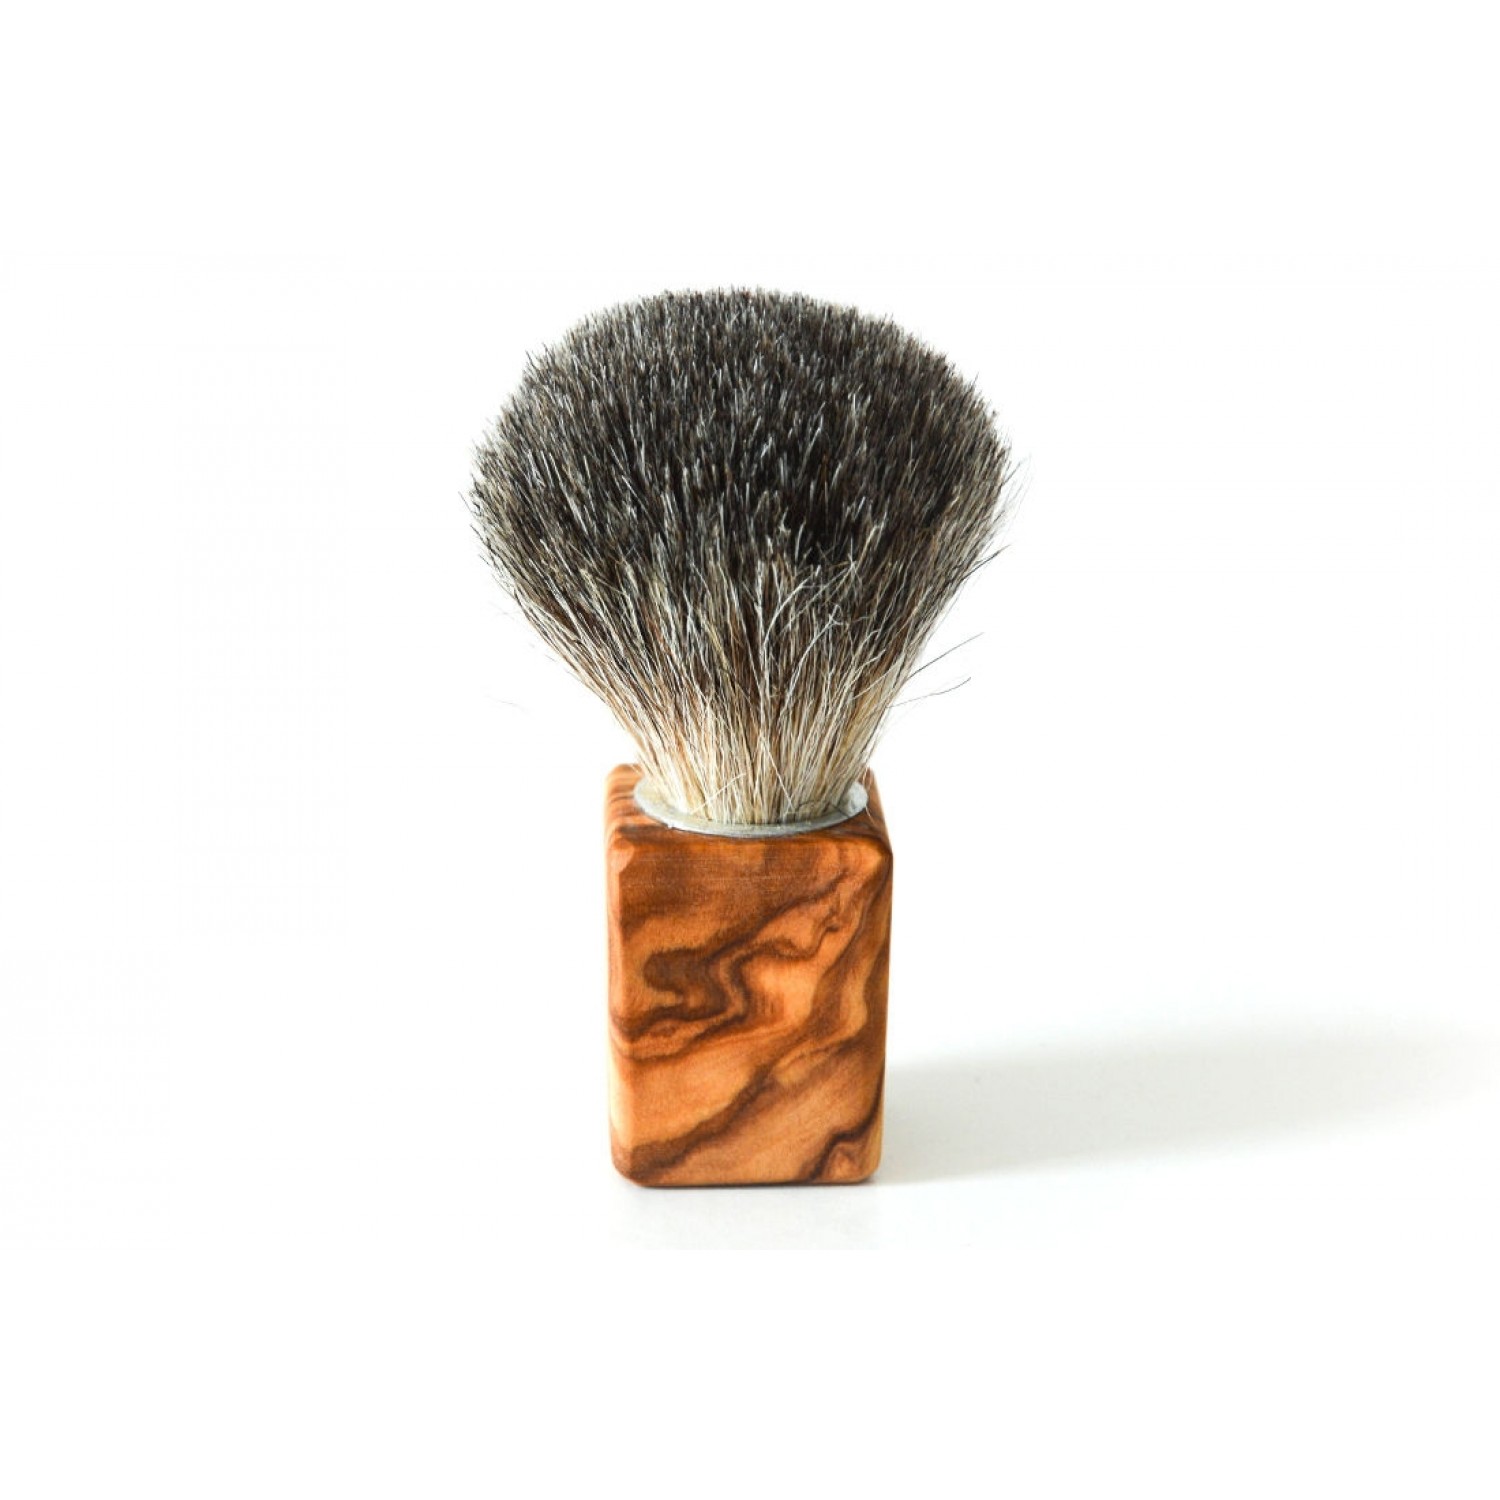 “Cubus” Badger Hair Brush with Olive Wood Handle | D.O.M. 